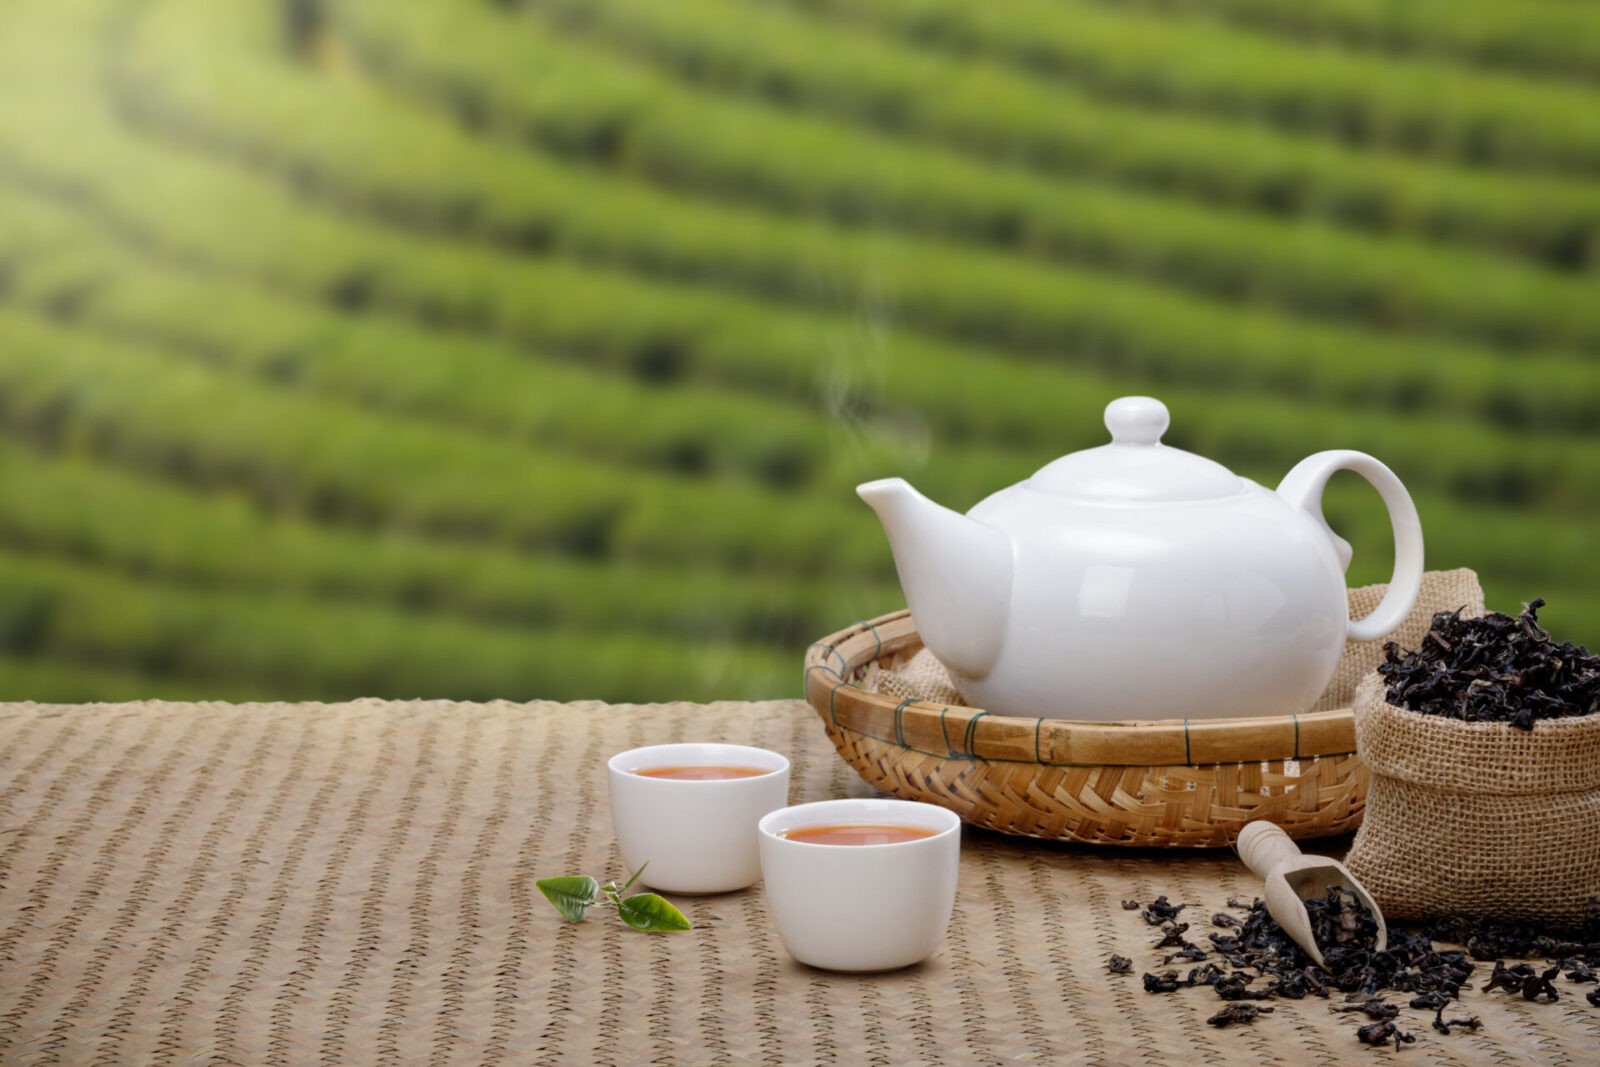 Warm cup of tea with teapot, green tea leaves and dried herbs on